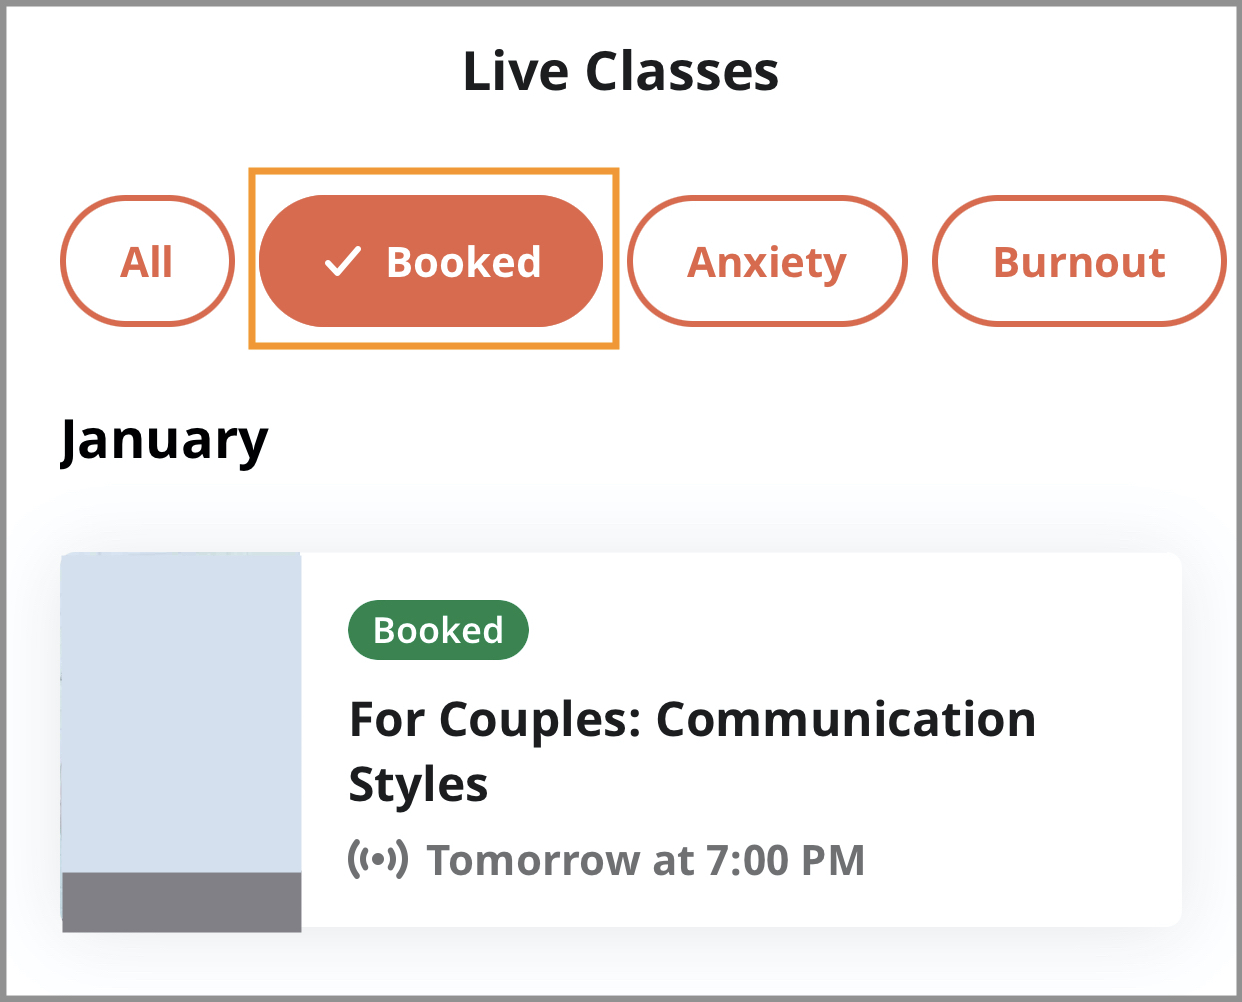 Booked Class